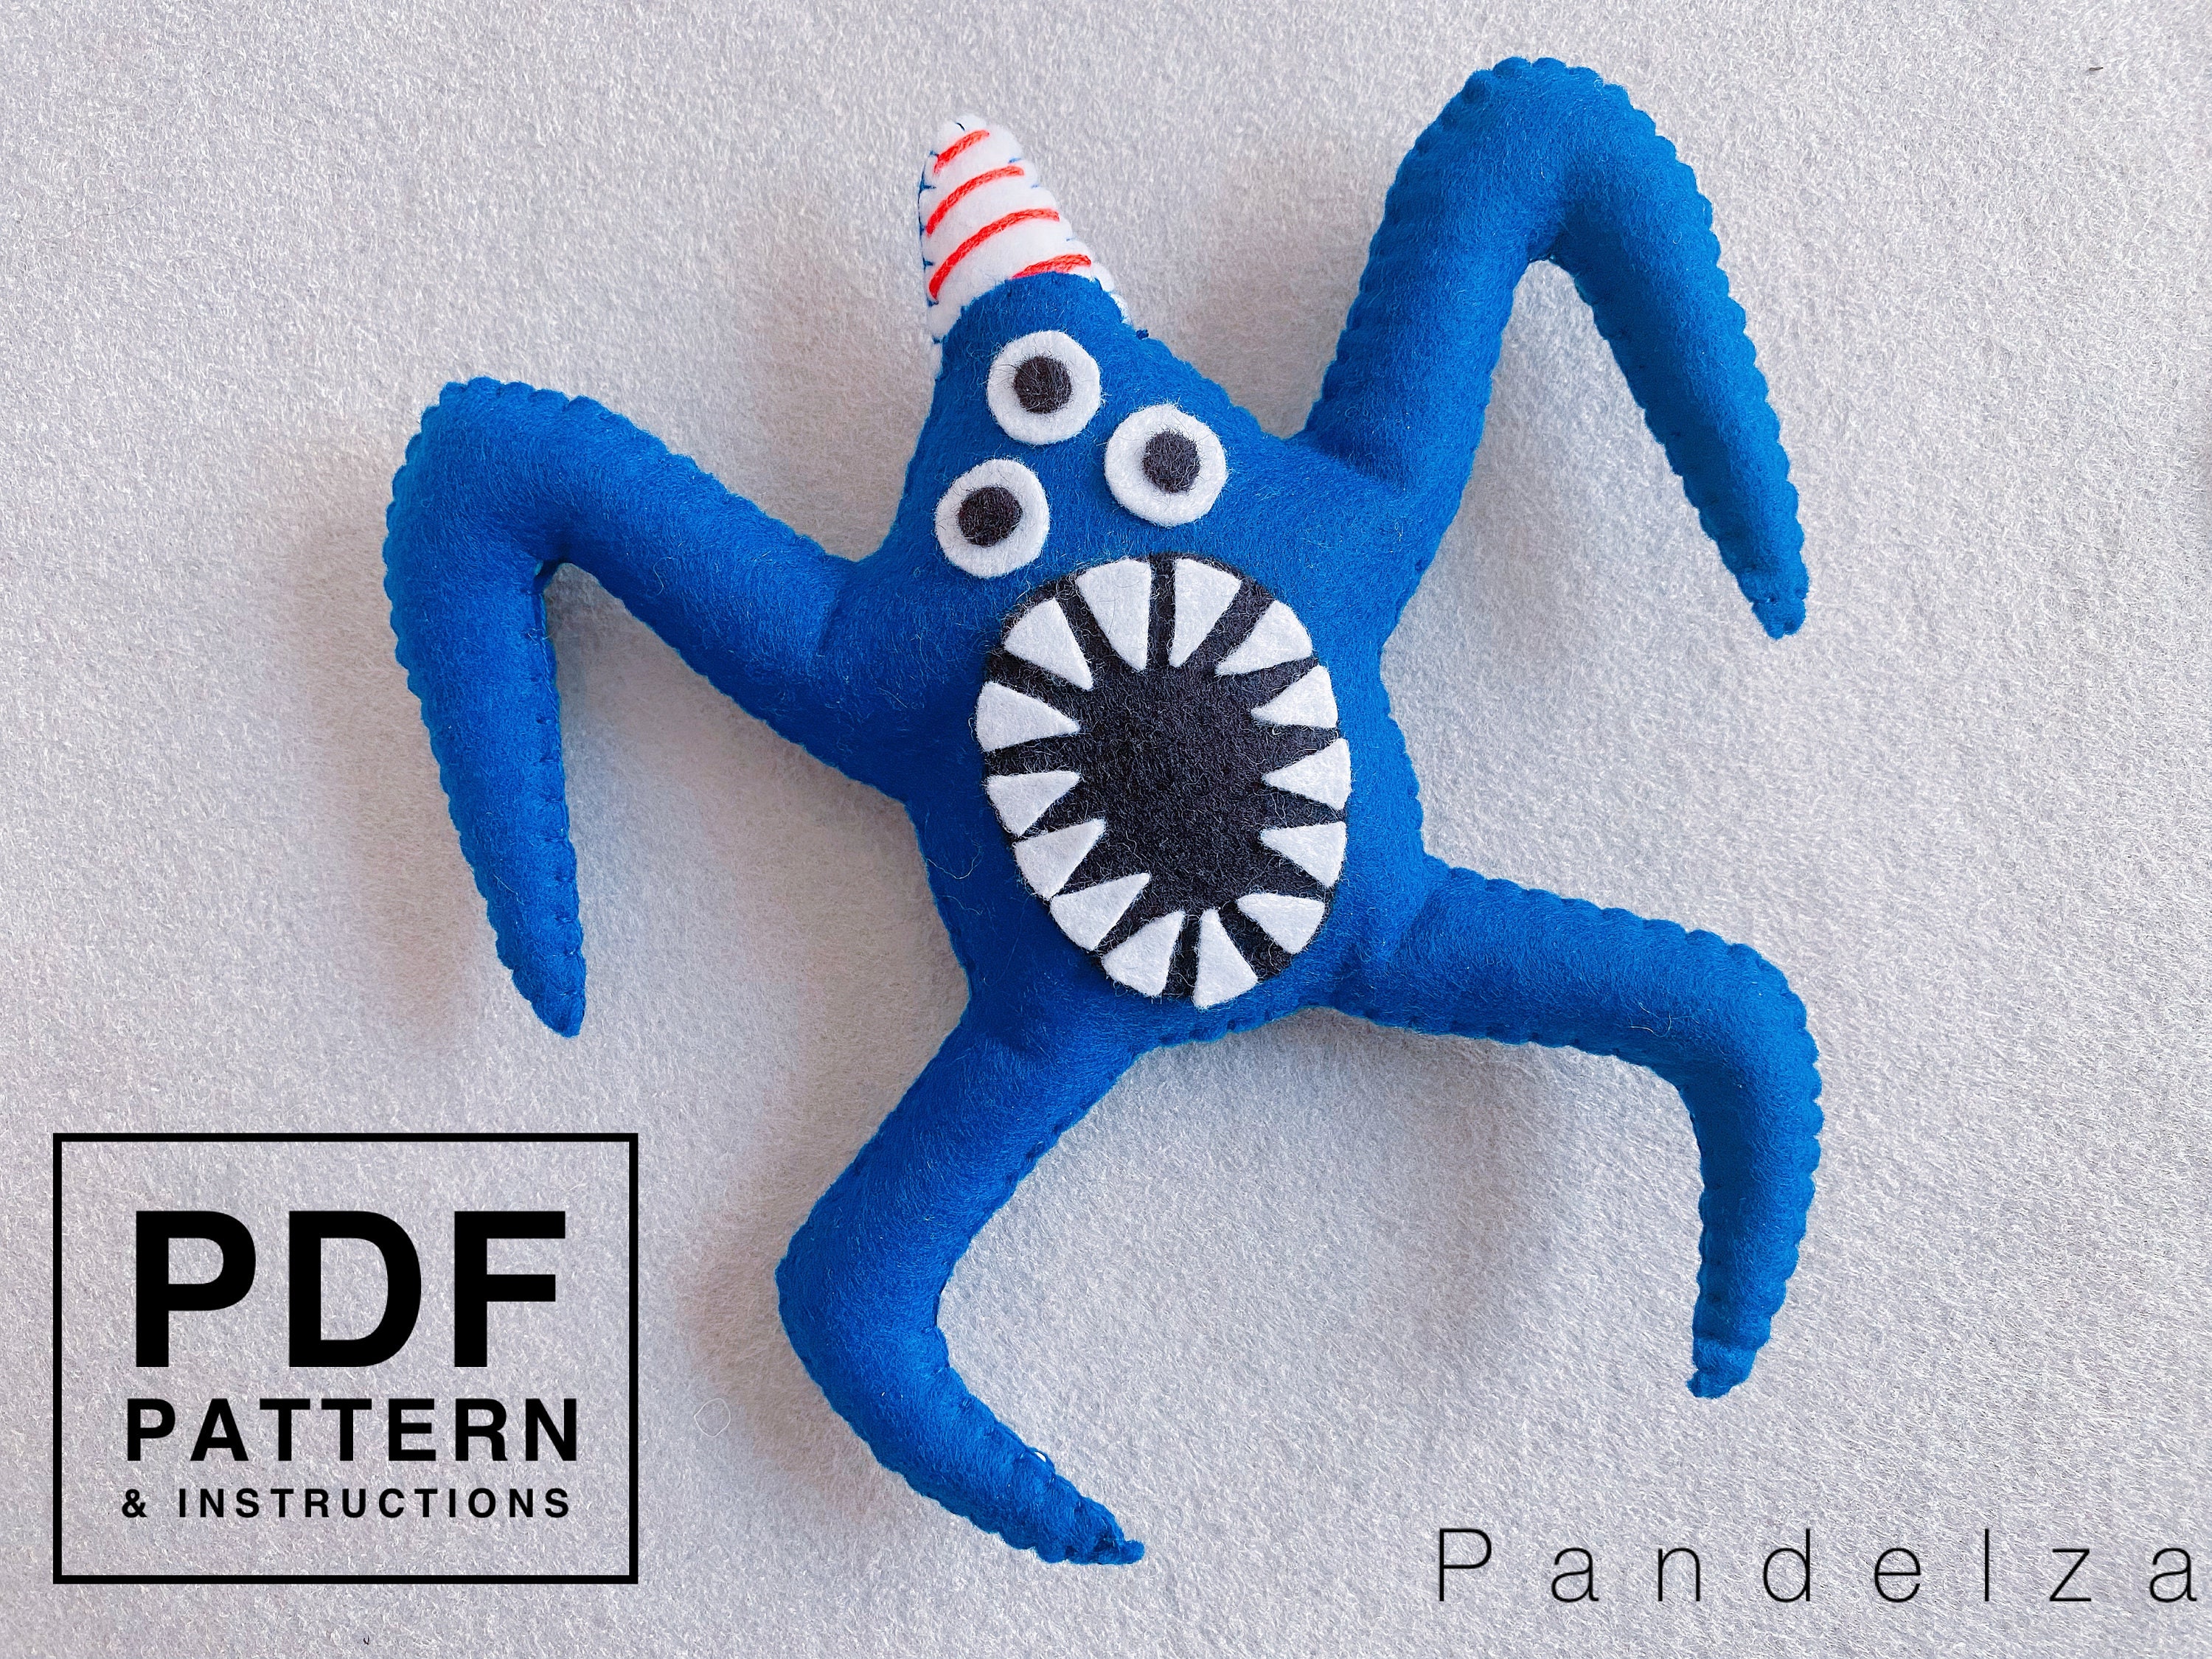 PDF Pattern Garten of Ban Ban Nab Nab Felt Sewing Stuffed Toy. Easy DIY  Hand Sewing Toy Pattern and Tutorial. Great Gift for Kids. 